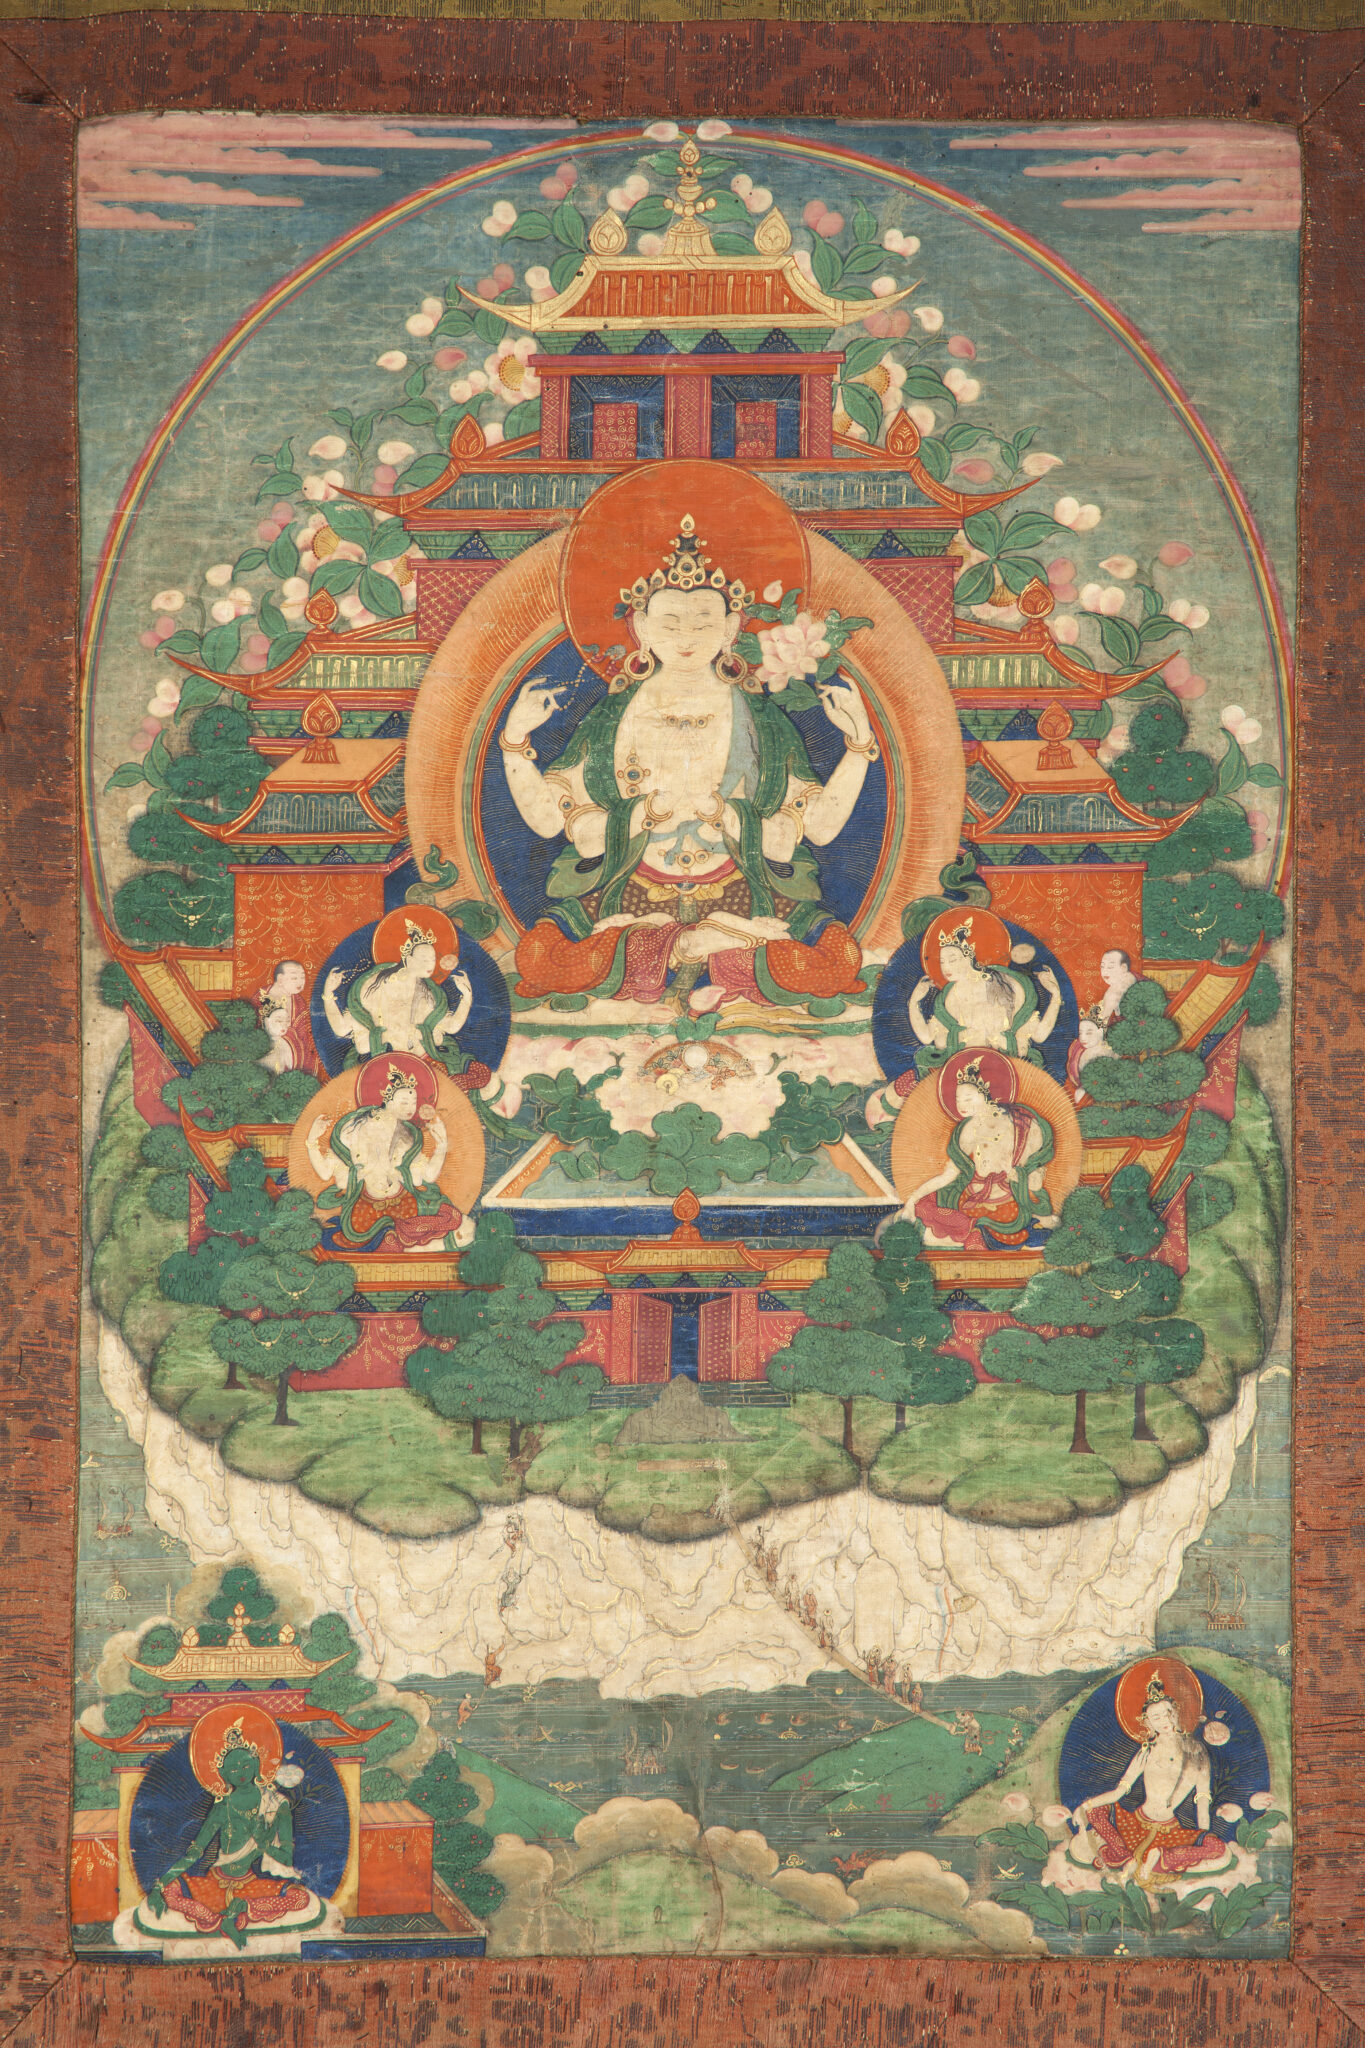 Bodhisattva flanked by attendants seated before pagoda-roofed structure emerging from forested white-stone mound